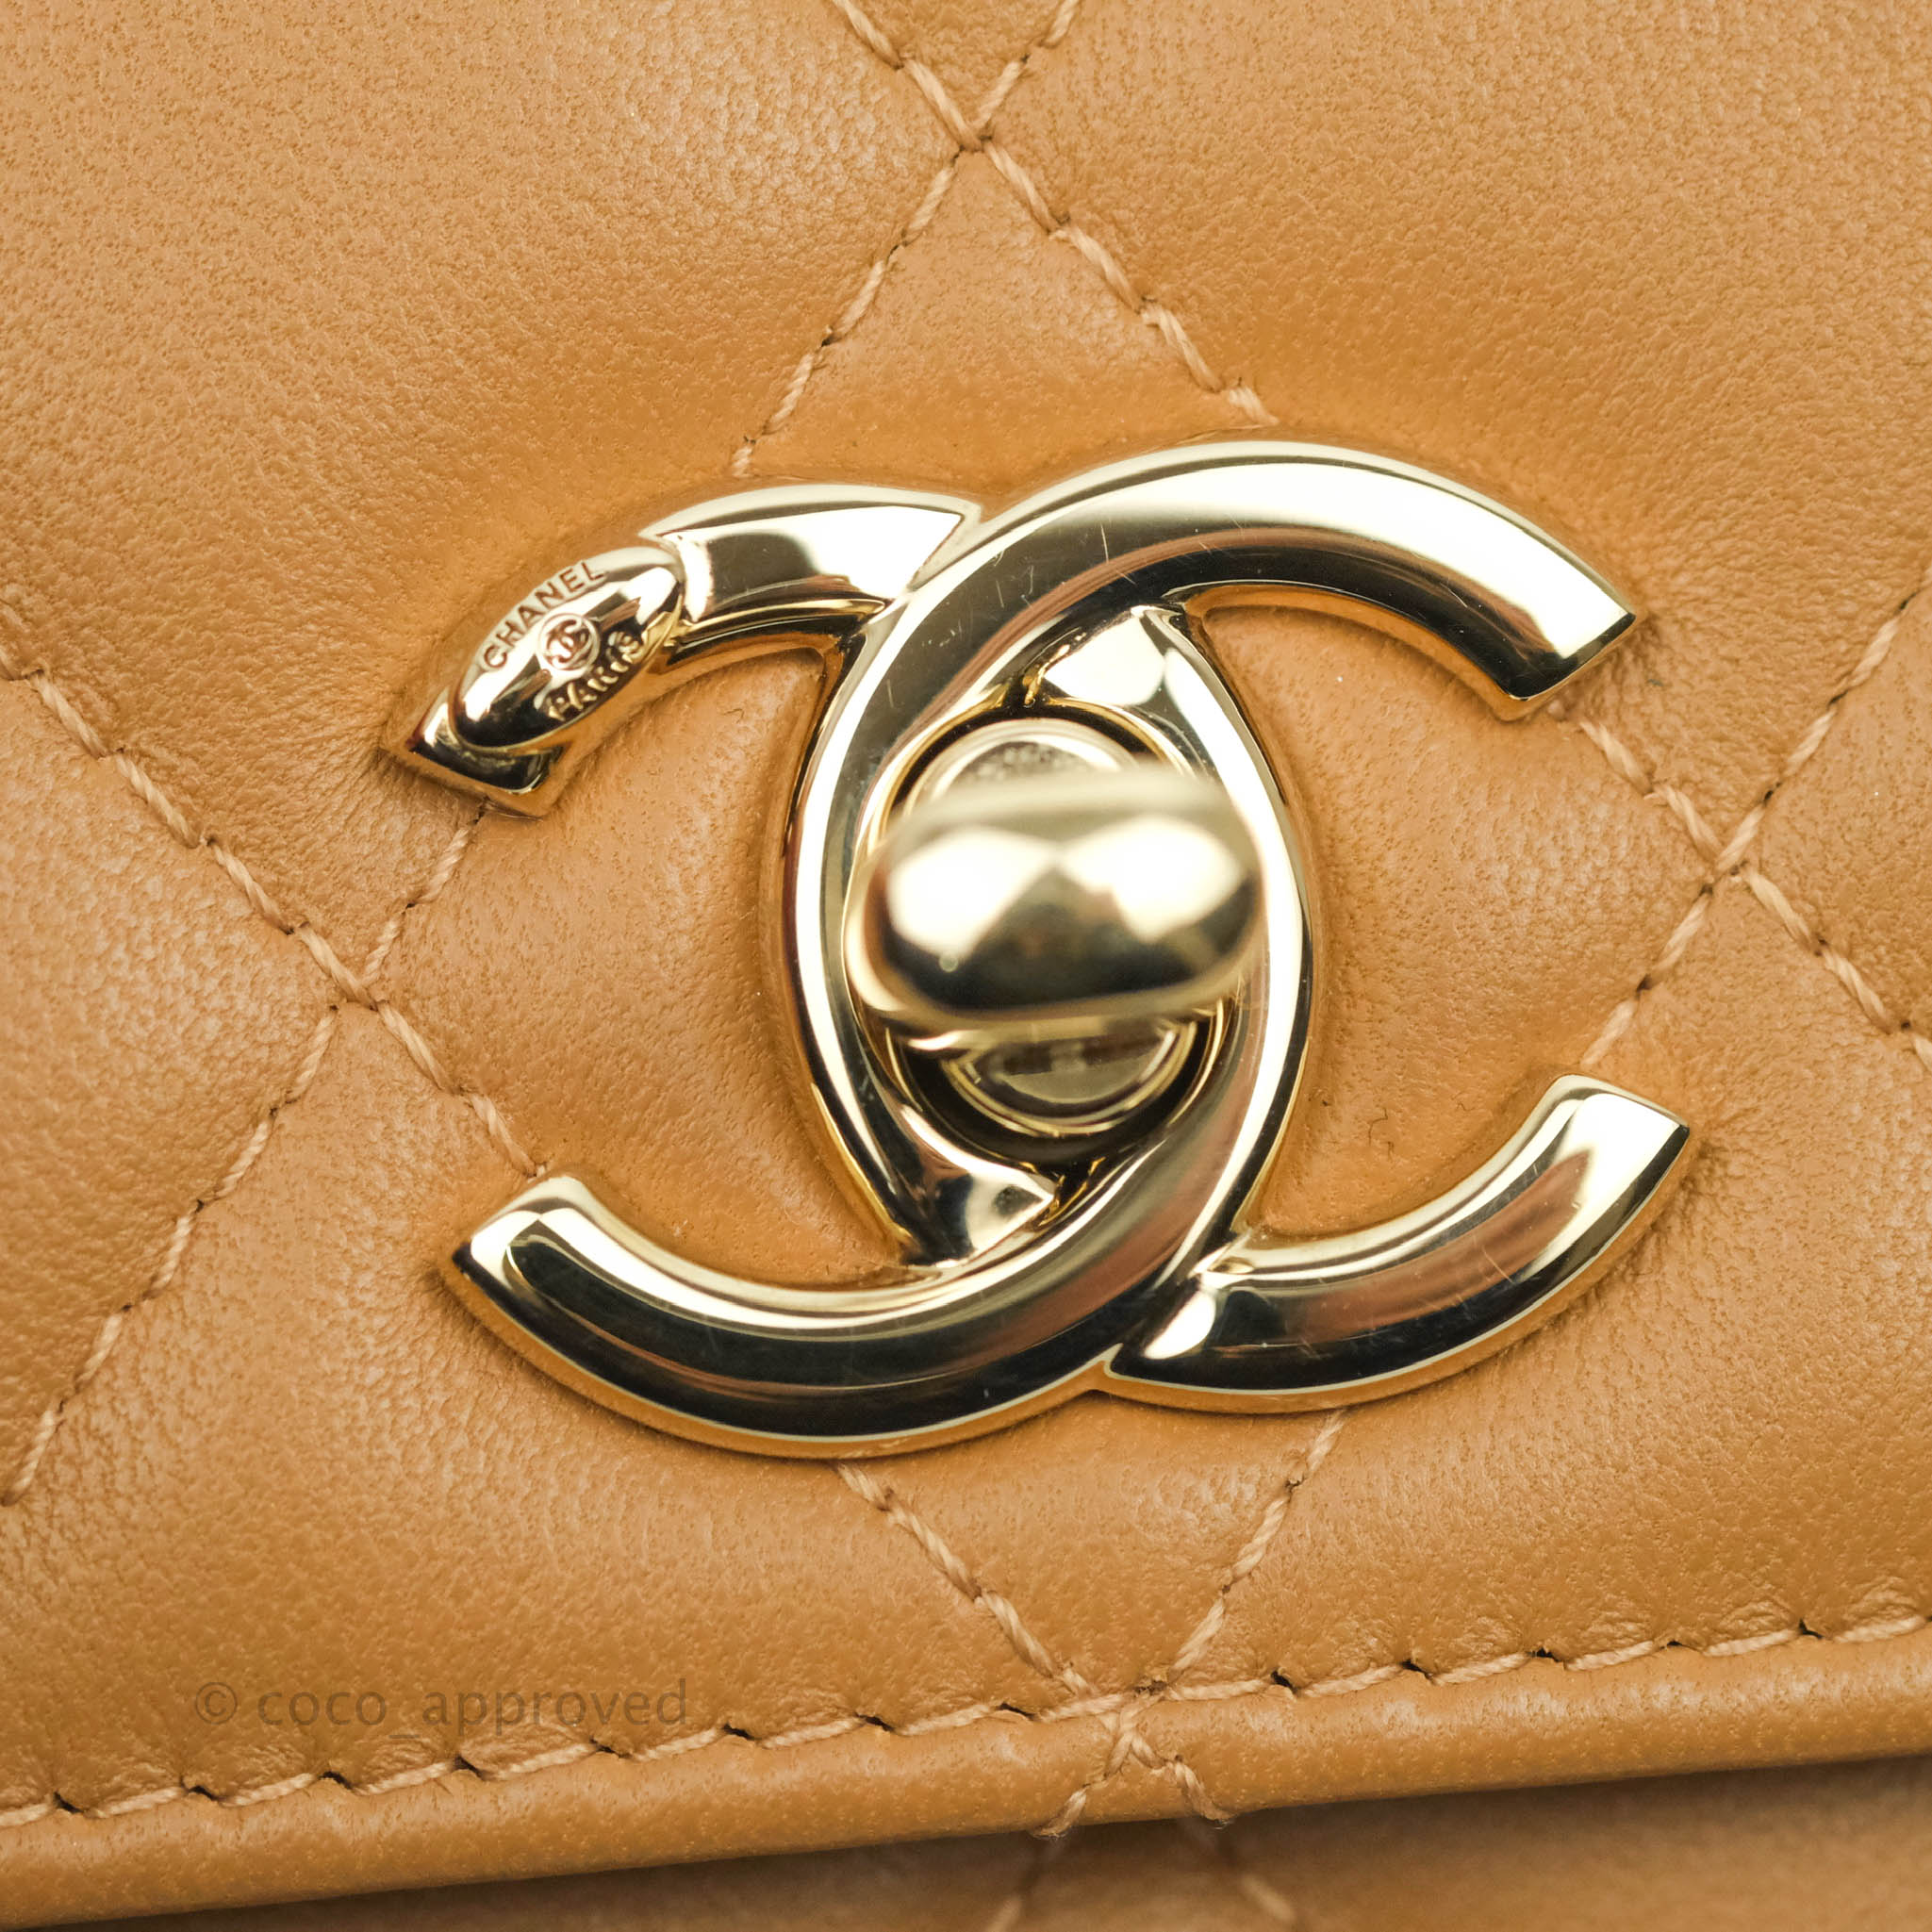 Chanel Mini Quilted Trendy CC Clutch With Chain Caramel Dark Beige